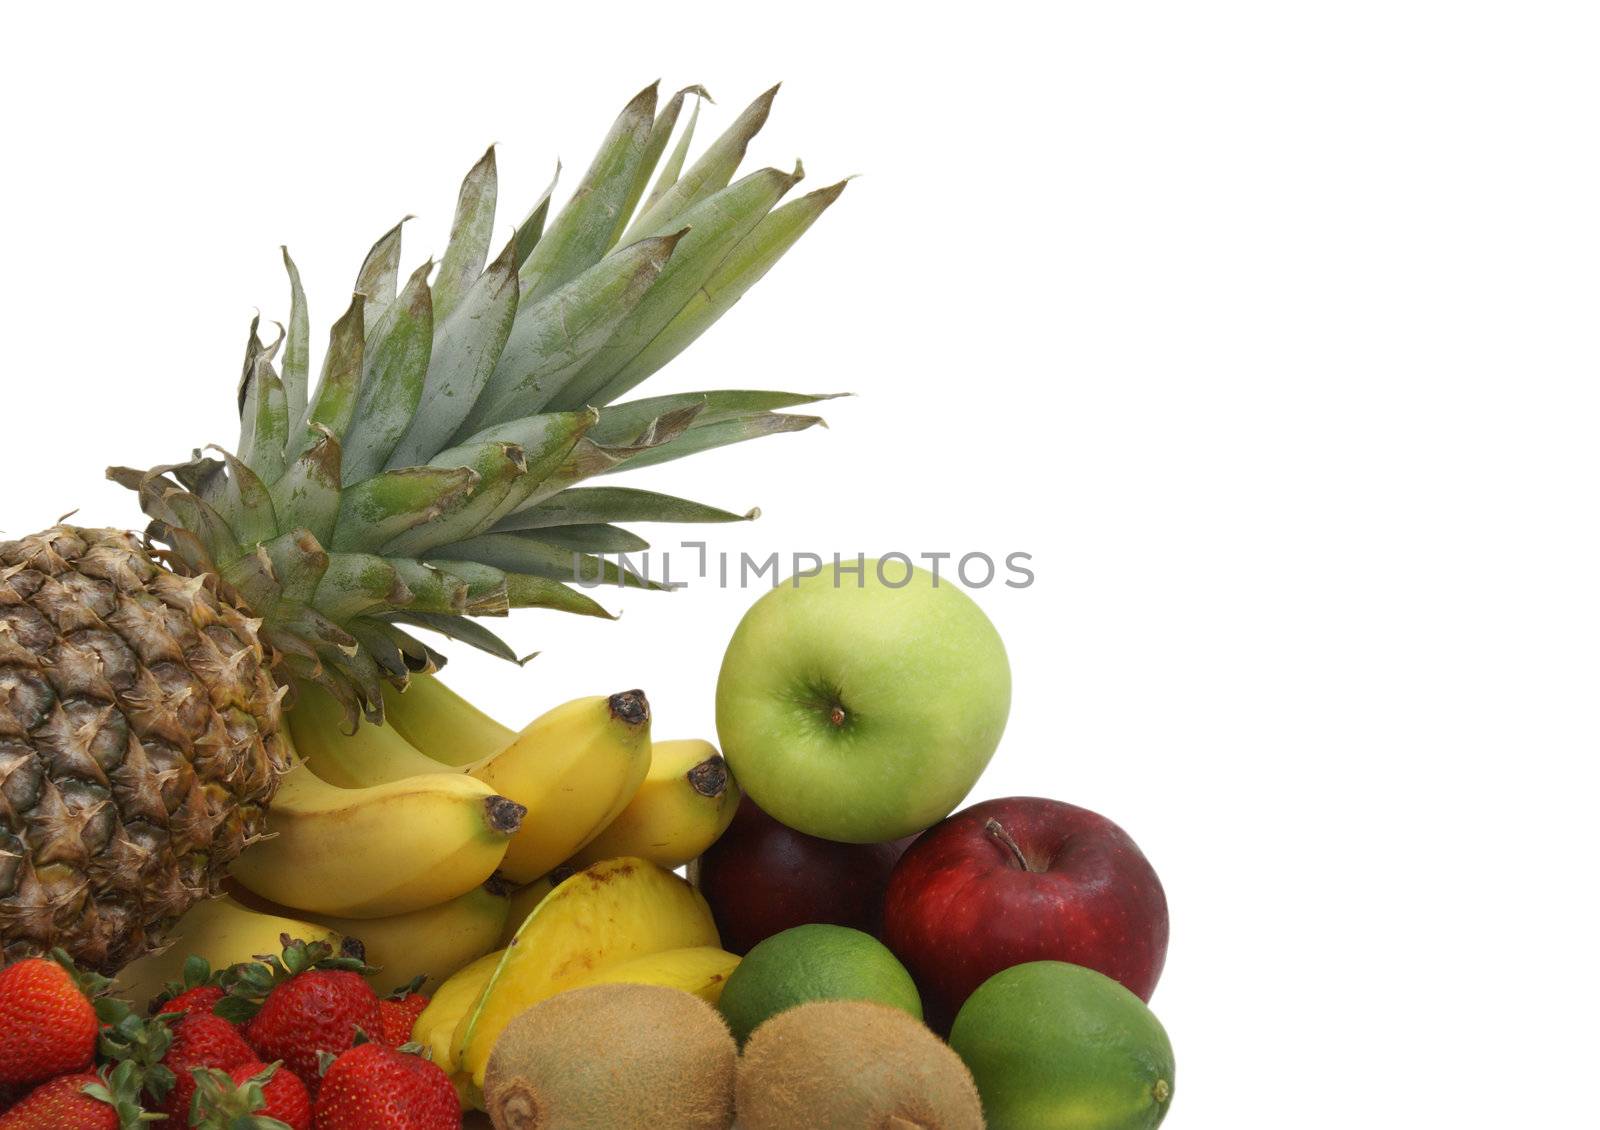 An arrangement of various fruits on a white background.